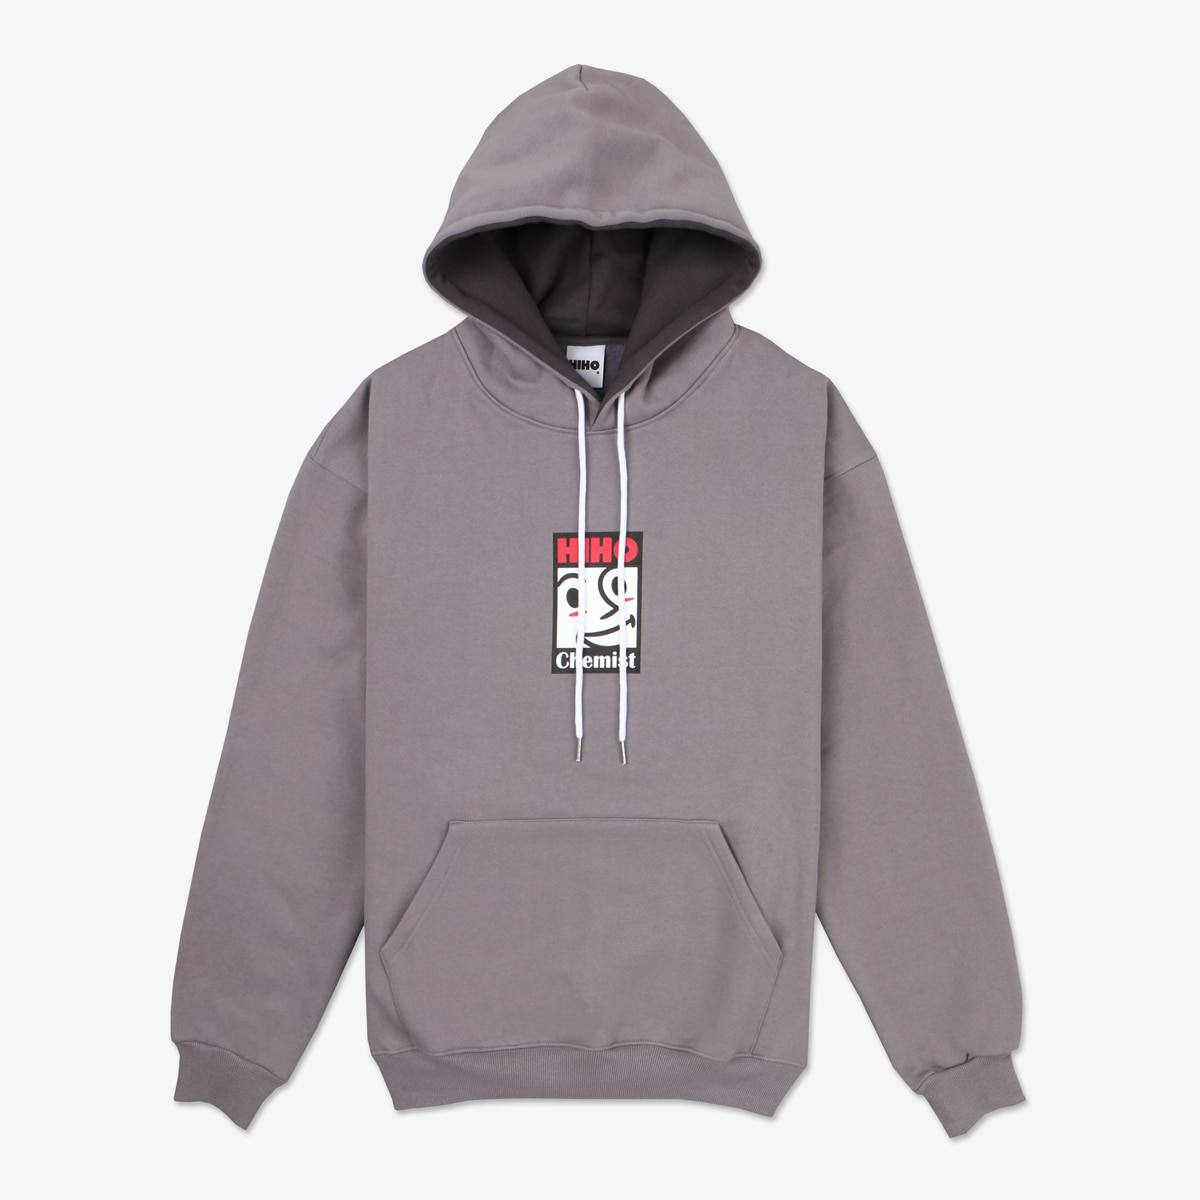 EXPT. HOODIE - WARM GRAY